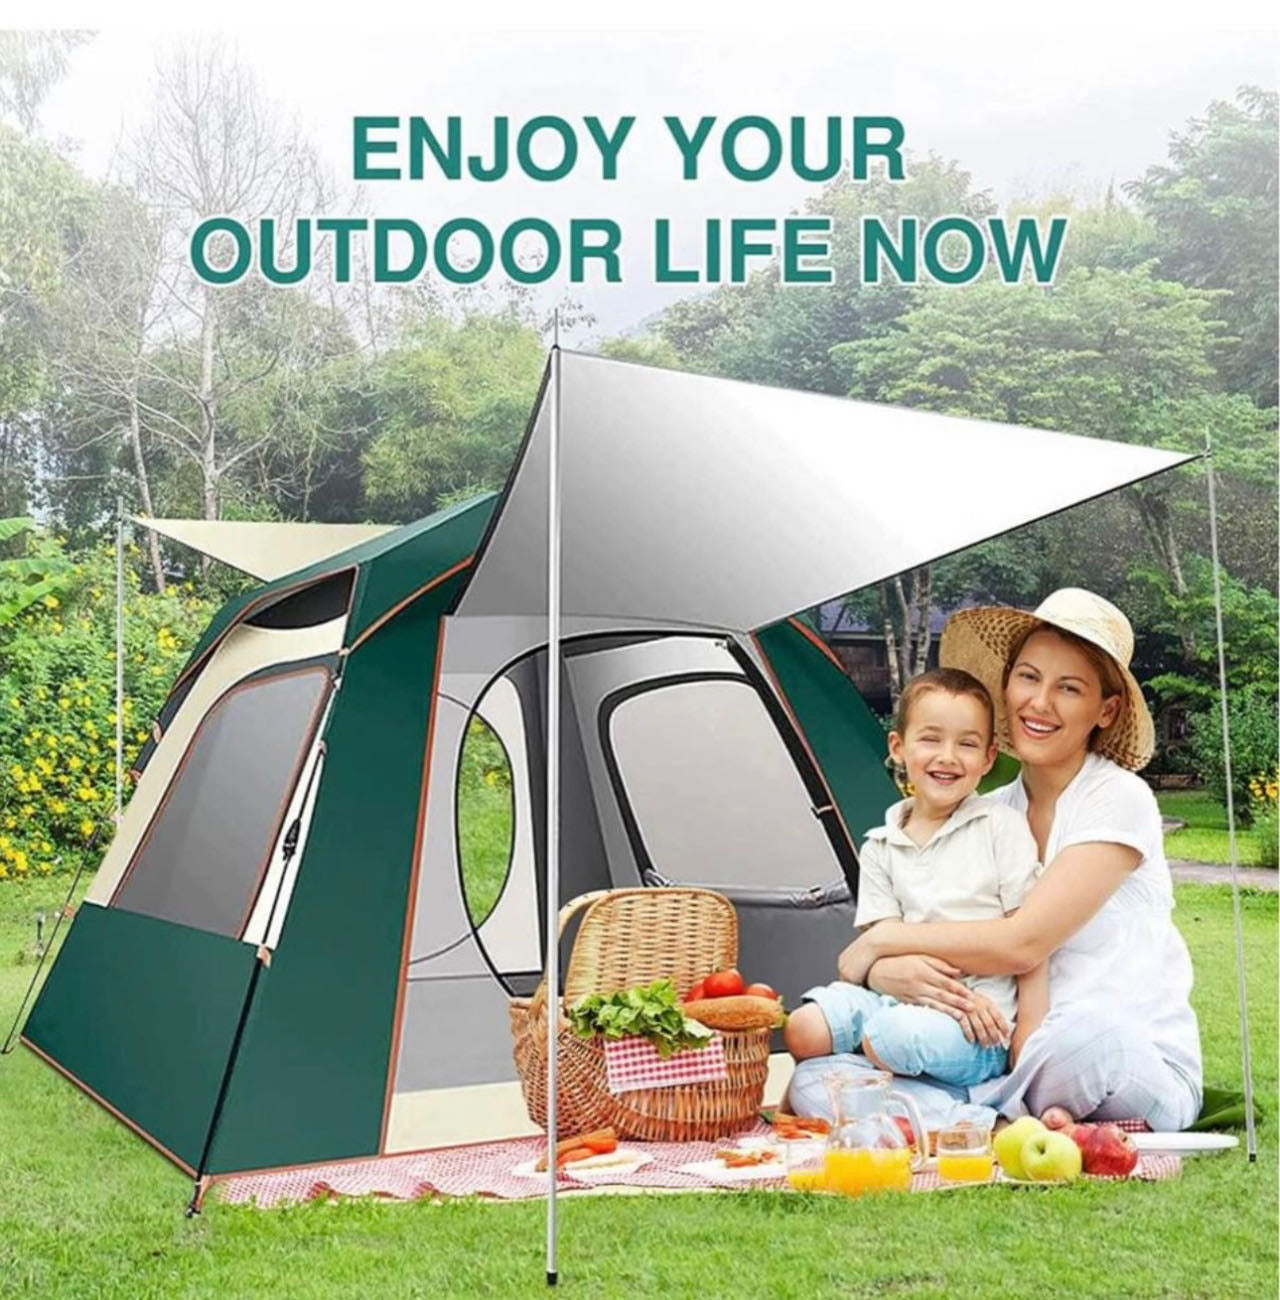 Family Camping Waterproof Tent, 79X79X57(Inches), Lightweight, UV Resistant, Outdoor Camping Gear